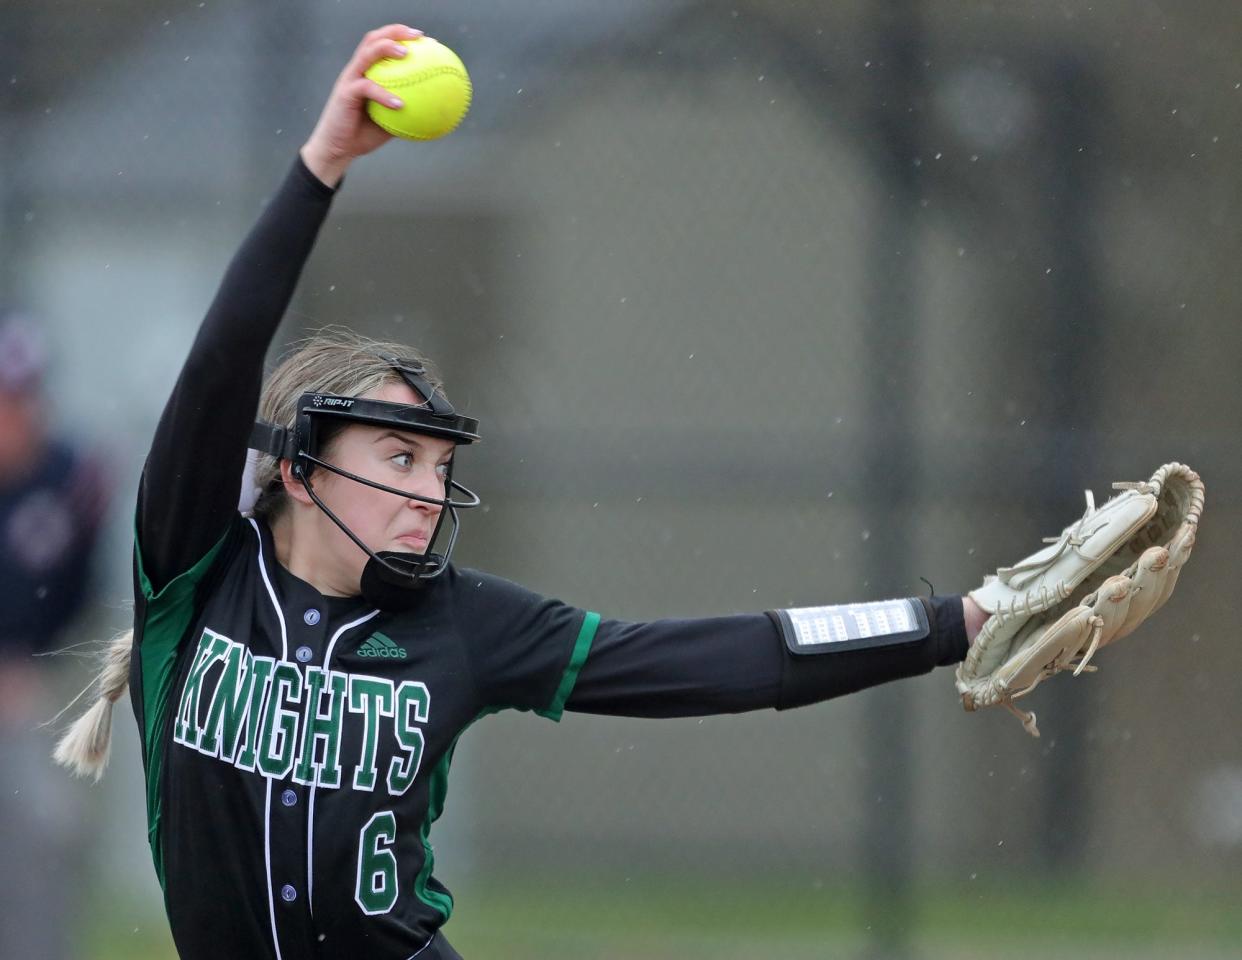 Nordonia pitcher Jenna Cornett delivers to a Hudson batter during the first inning of a softball game in Macedonia on Wednesday.